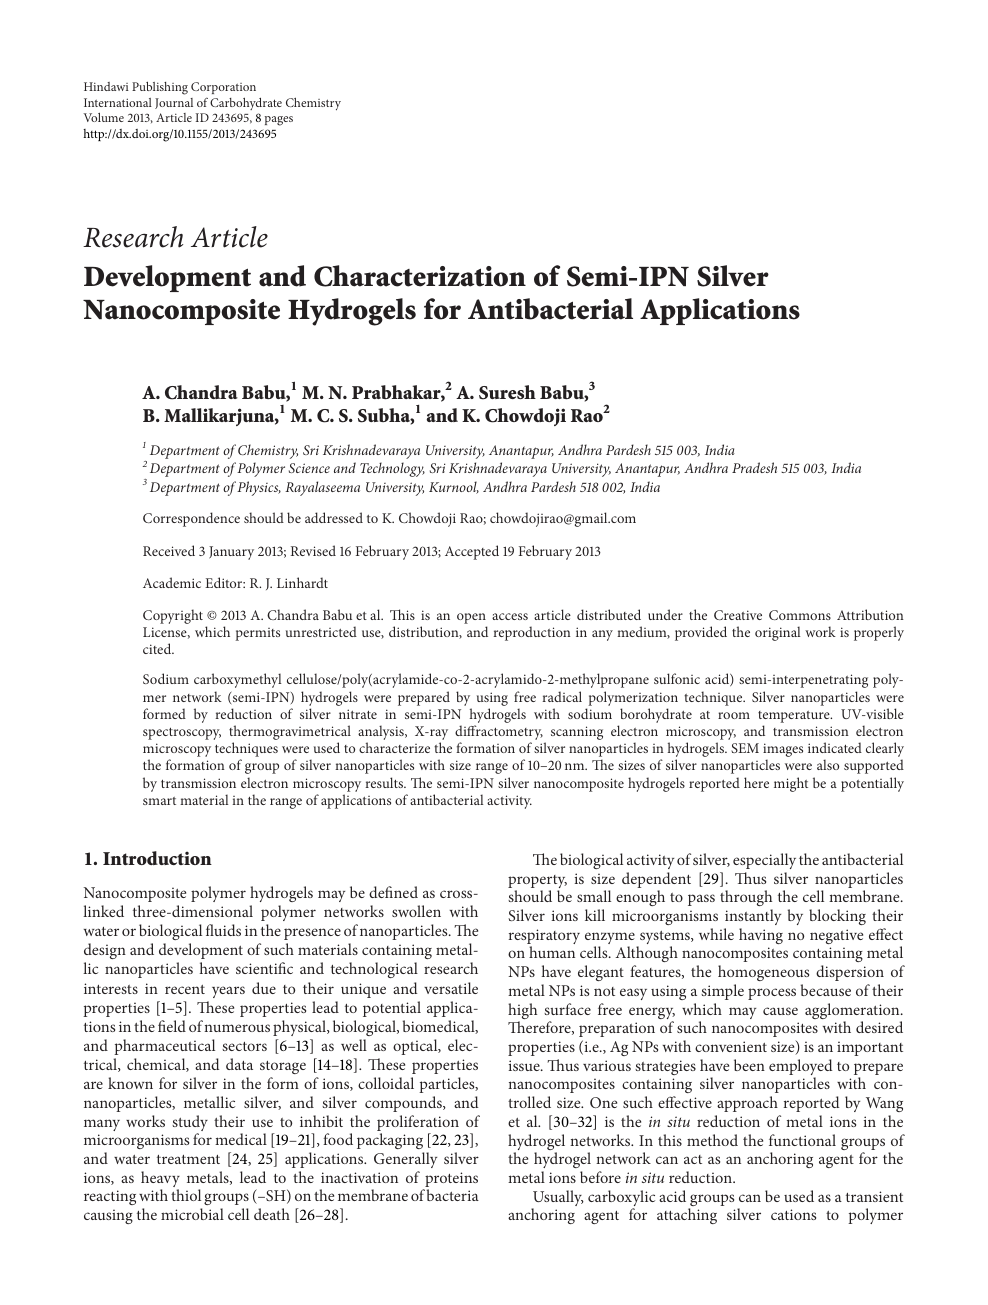 Development And Characterization Of Semi Ipn Silver Nanocomposite Hydrogels For Antibacterial Applications Topic Of Research Paper In Chemical Sciences Download Scholarly Article Pdf And Read For Free On Cyberleninka Open Science Hub